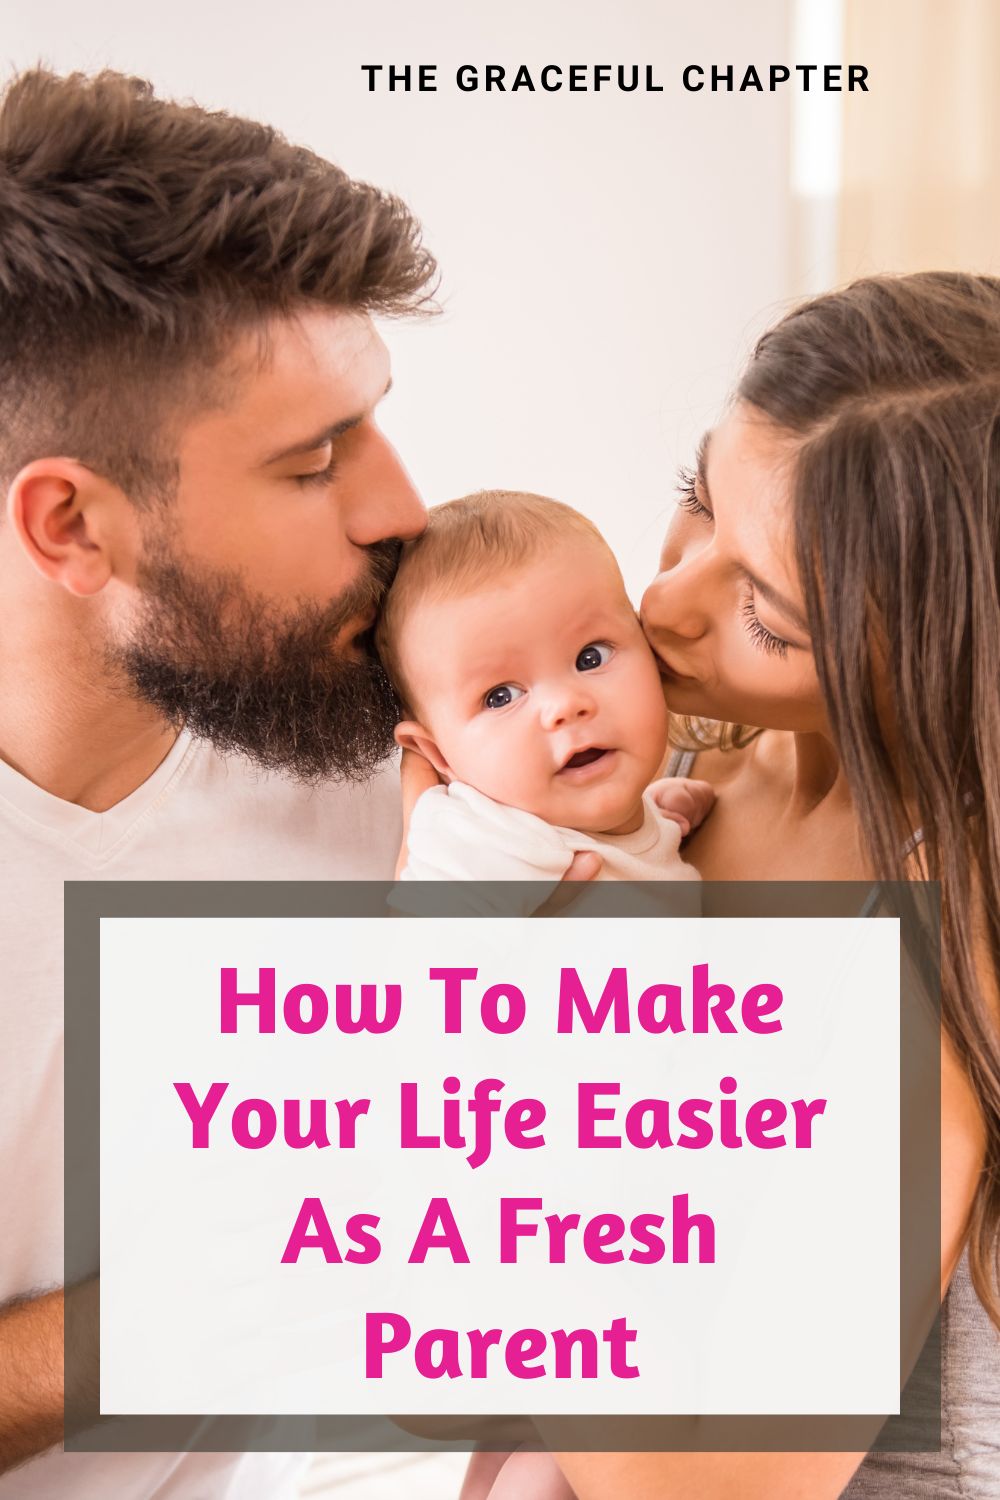 How To Make Your Life Easier As A Fresh Parent